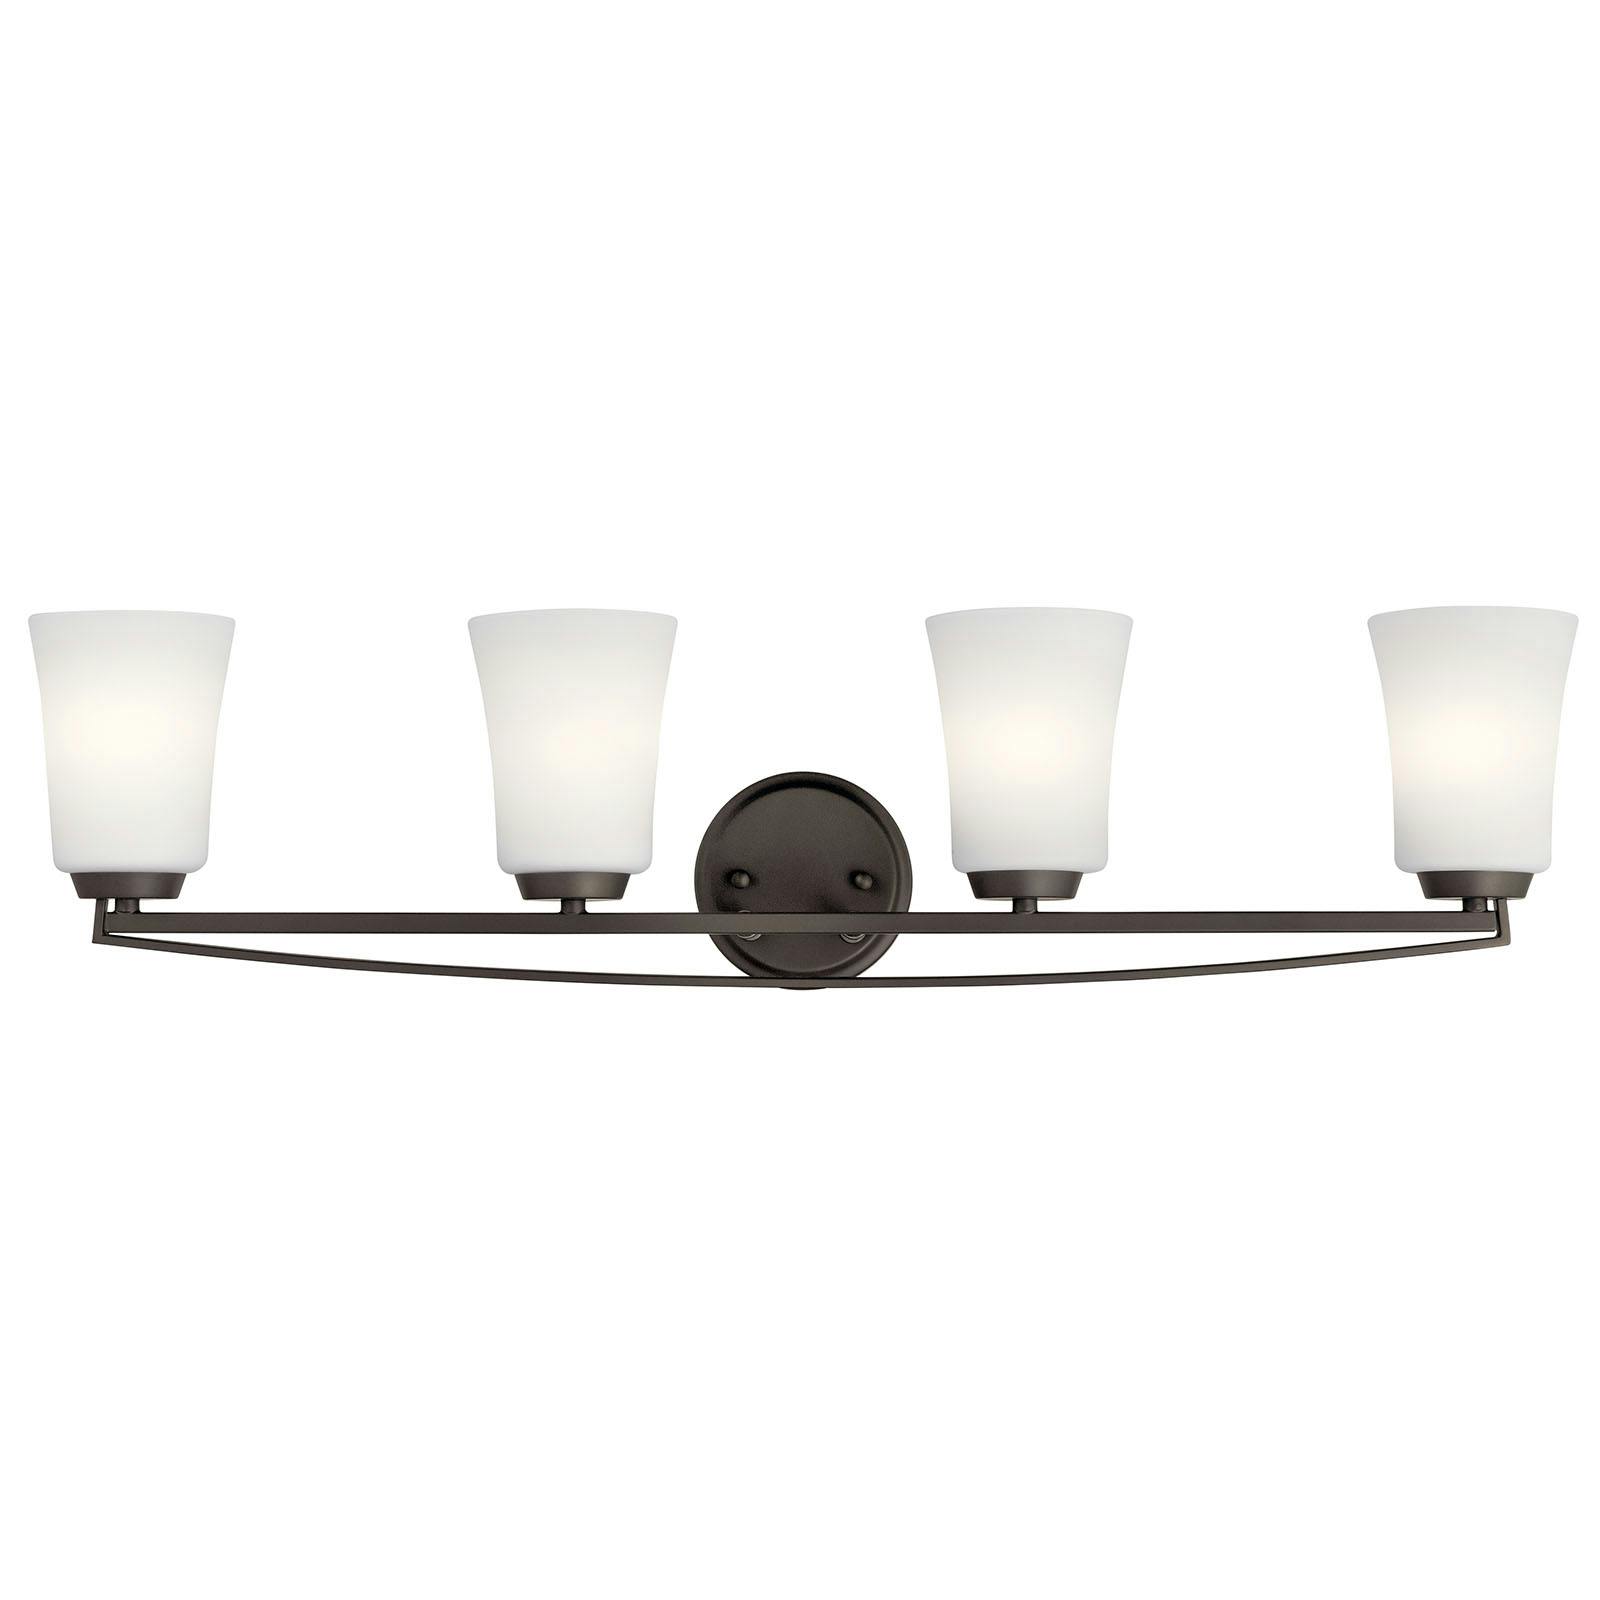 The Tao 4 Light Vanity Light Olde Bronze® facing up on a white background